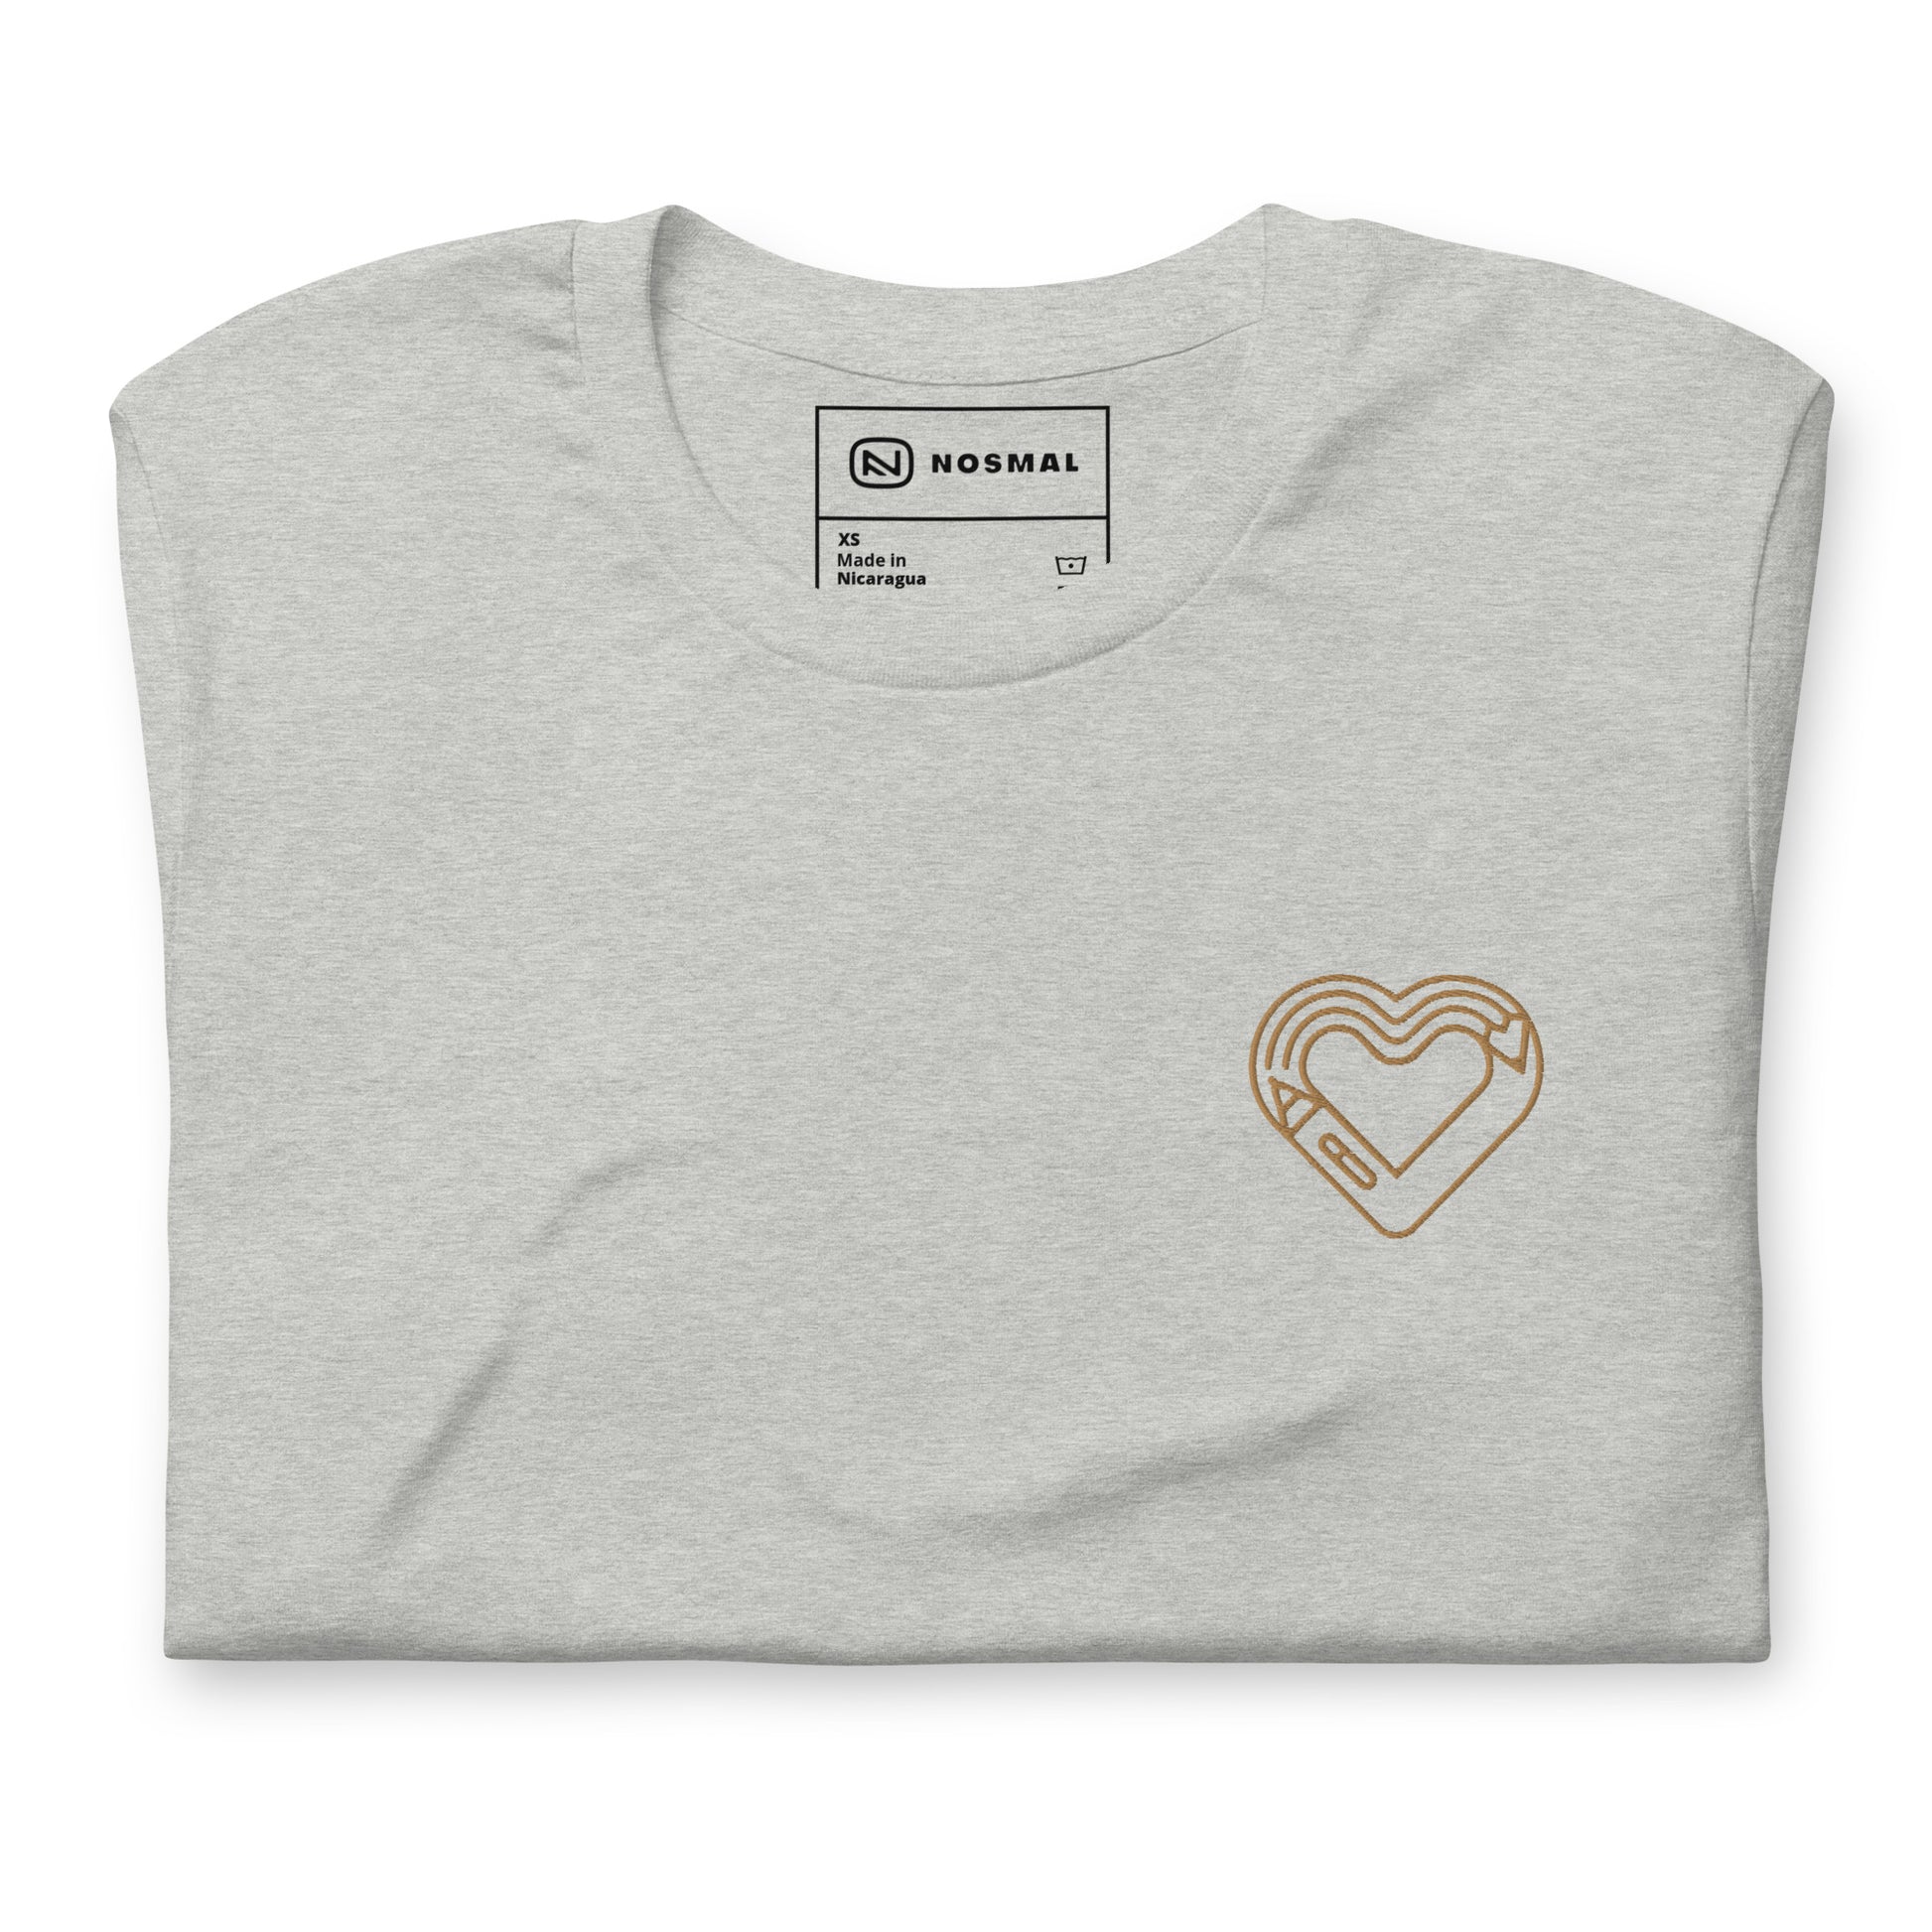 Top down view of maker's heart I gold embroidered design on heather athletic grey unisex t-shirt.